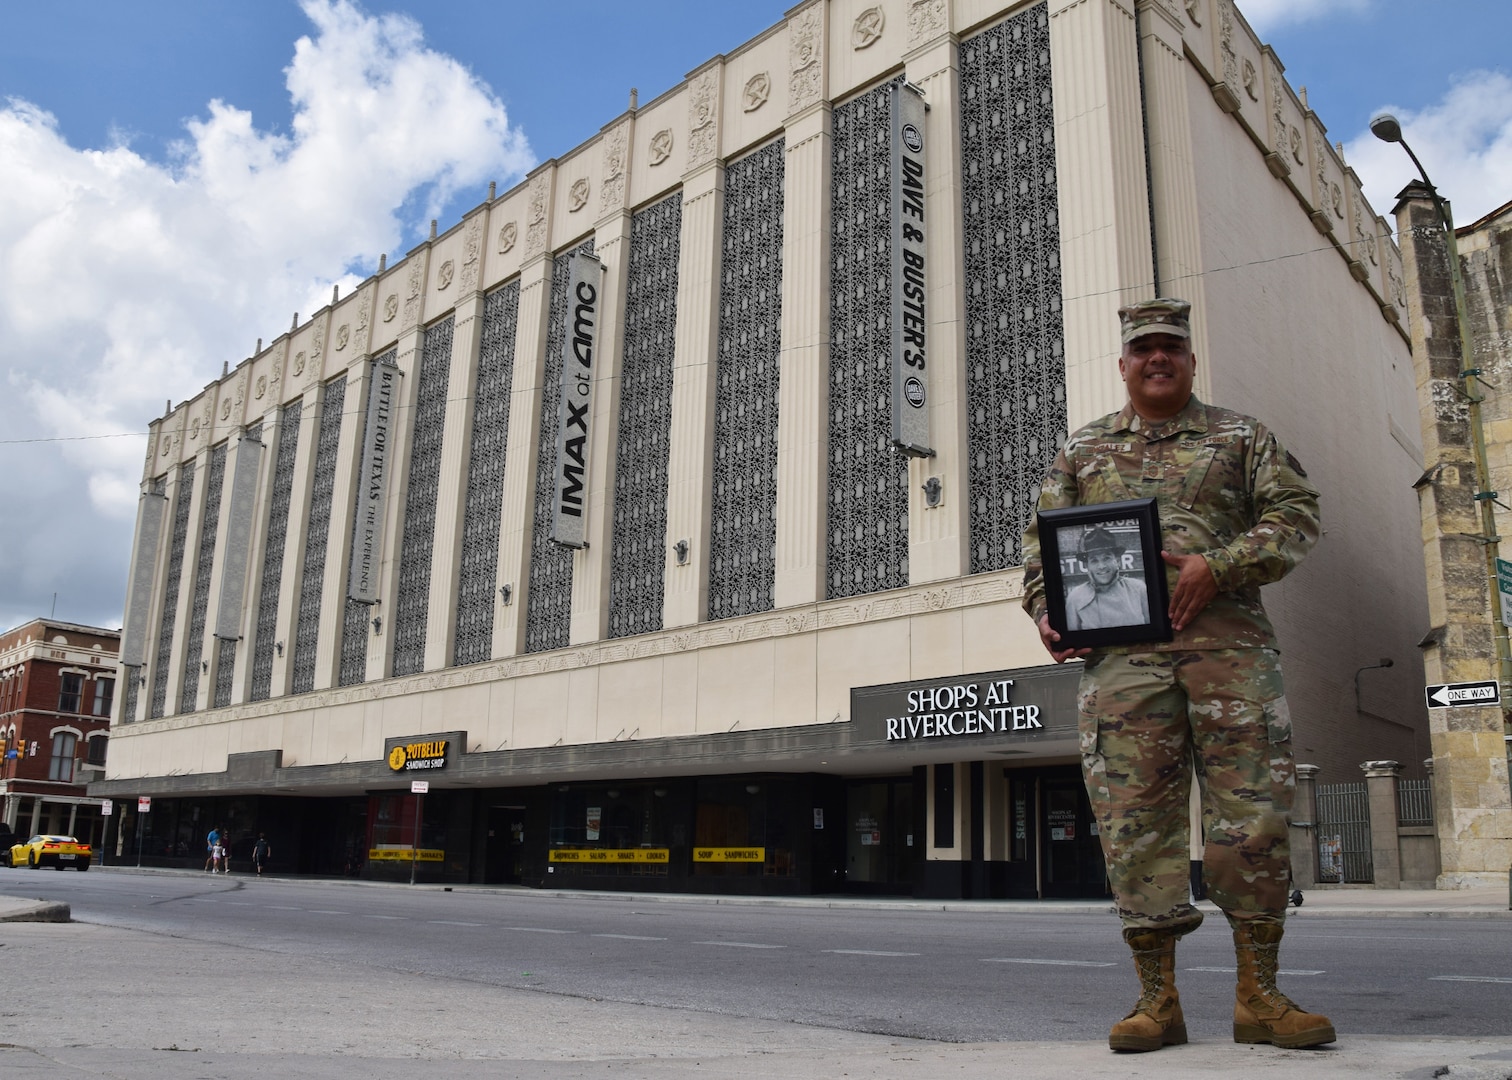 Chief Master Sgt. Joe G. Gonzalez Jr., 433rd Mission Support Group, group superintendent, holds a picture of his father, Joe G. Gonzalez Sr., in front of the Joske’s Department Store building, Oct. 9, 2020 in San Antonio. Gonzalez stated that his father, a welder, worked on the steel décor between the building’s columns. The building is part of the National Register of Historic Places-listed and City of San Antonio Alamo Plaza Historic District and is a City of San Antonio local landmark (U.S. Air Force photo by Tech. Sgt. Iram Carmona)